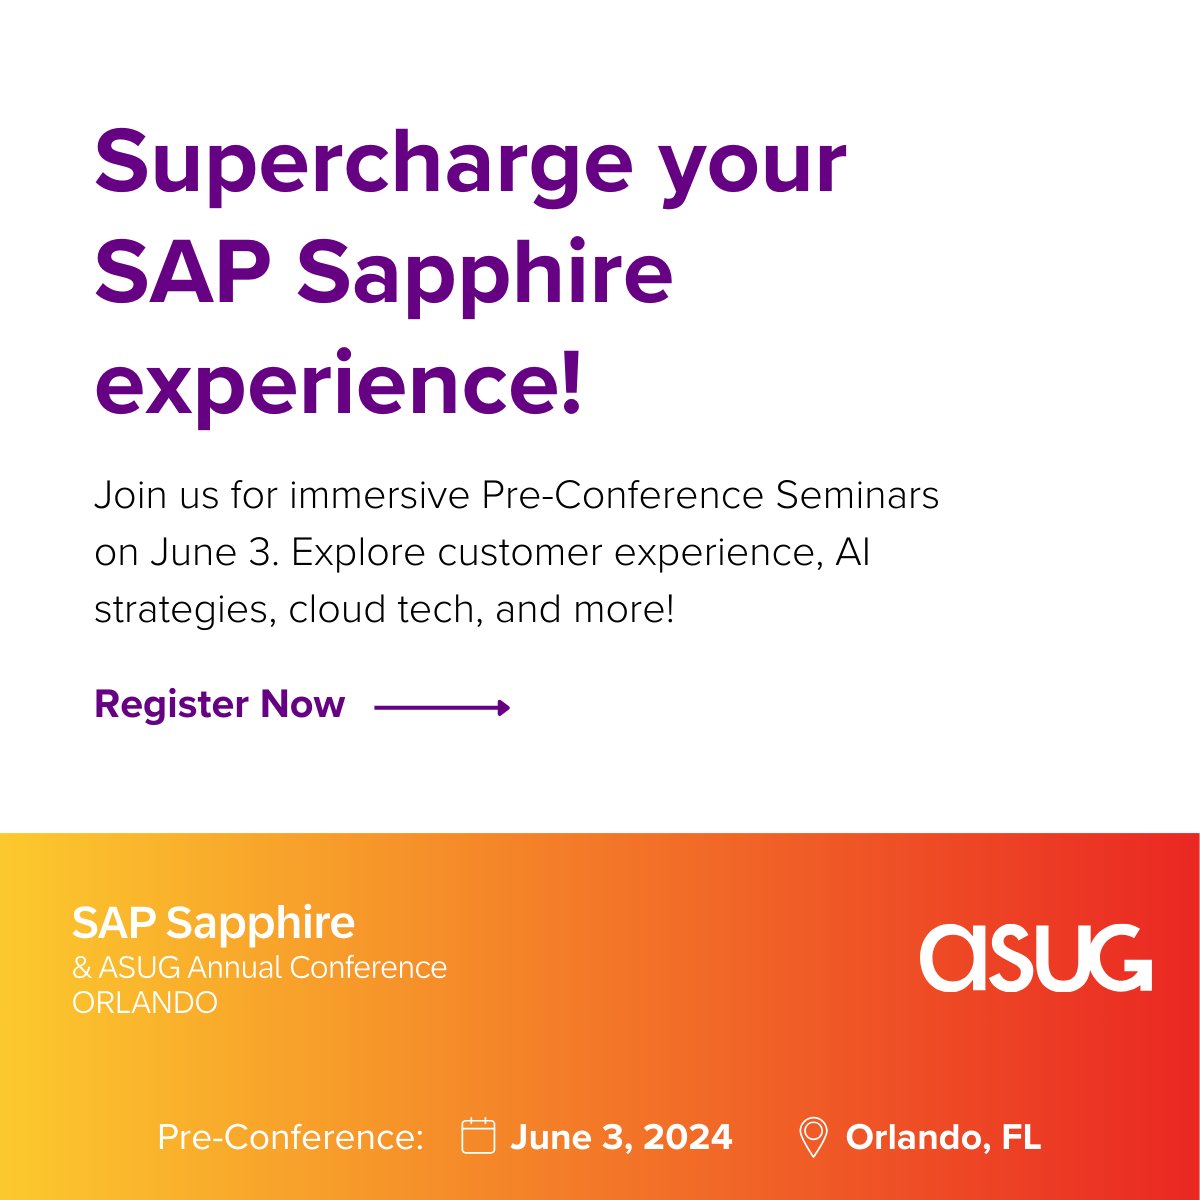 Join us in Orlando before #SAPSapphire & #ASUGAnnualConference to learn about Joule and @SAP's Digital Supply Chain solutions! Recent changes to #AI are now making it essential for modernizing supply chain efficiency. We’ll soon you soon: bit.ly/3wviLnT